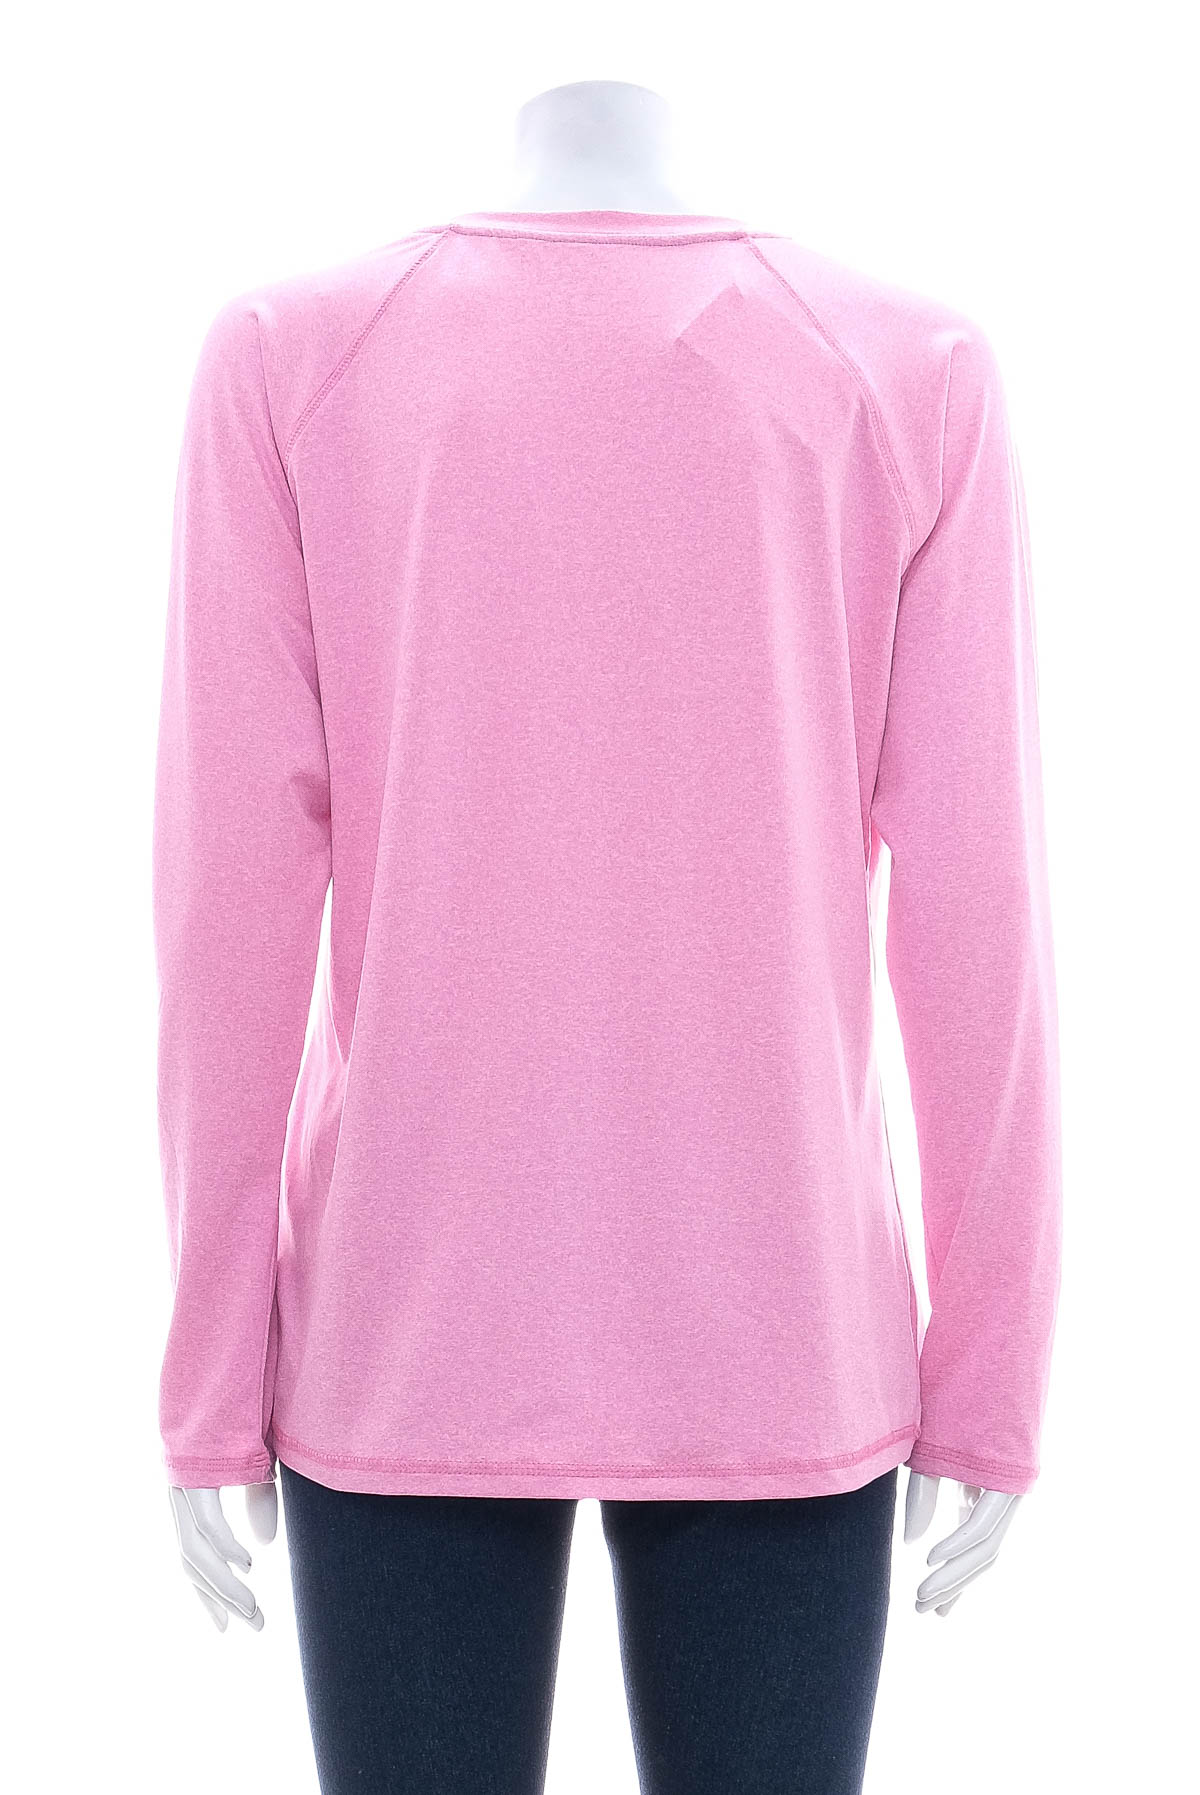 Women's blouse - Beverly Hills Polo Club - 1